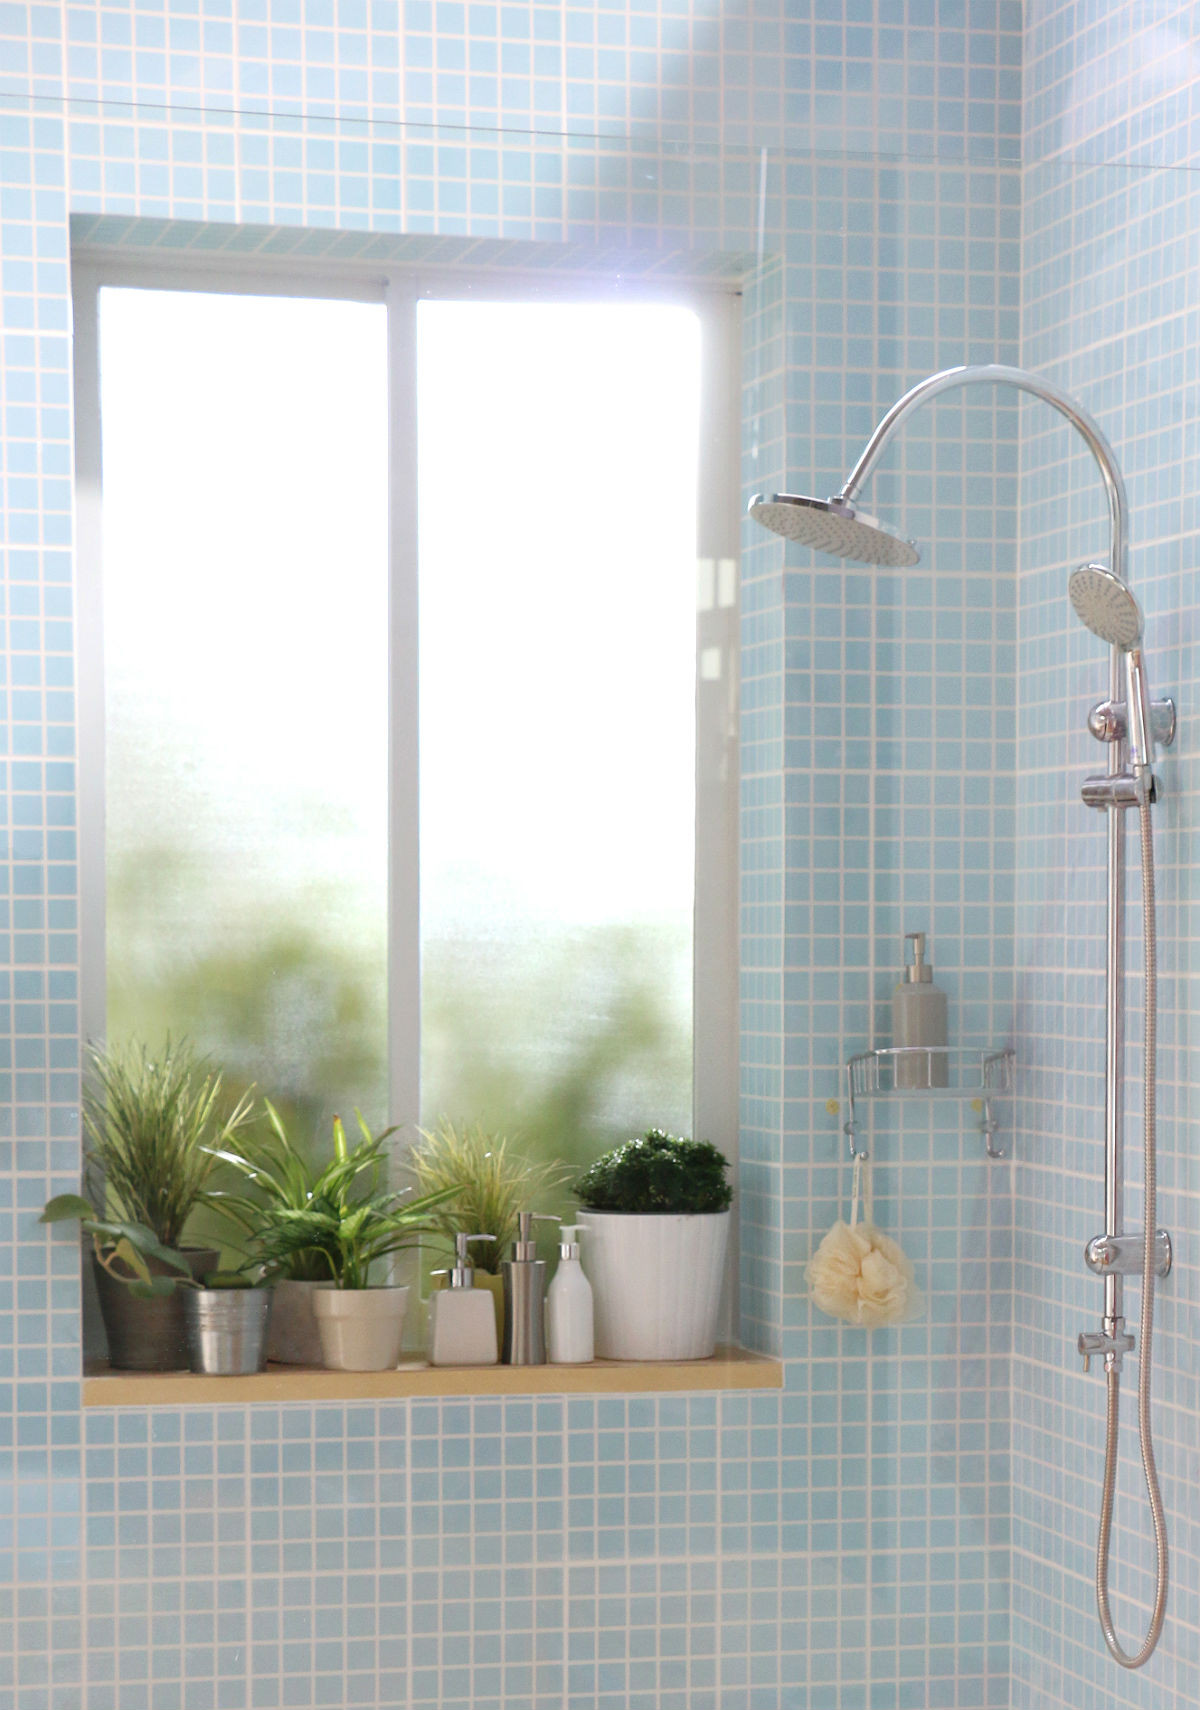 Bathroom Shower Windows
 Window in Your Shower 7 Ways to Maintain Privacy in the